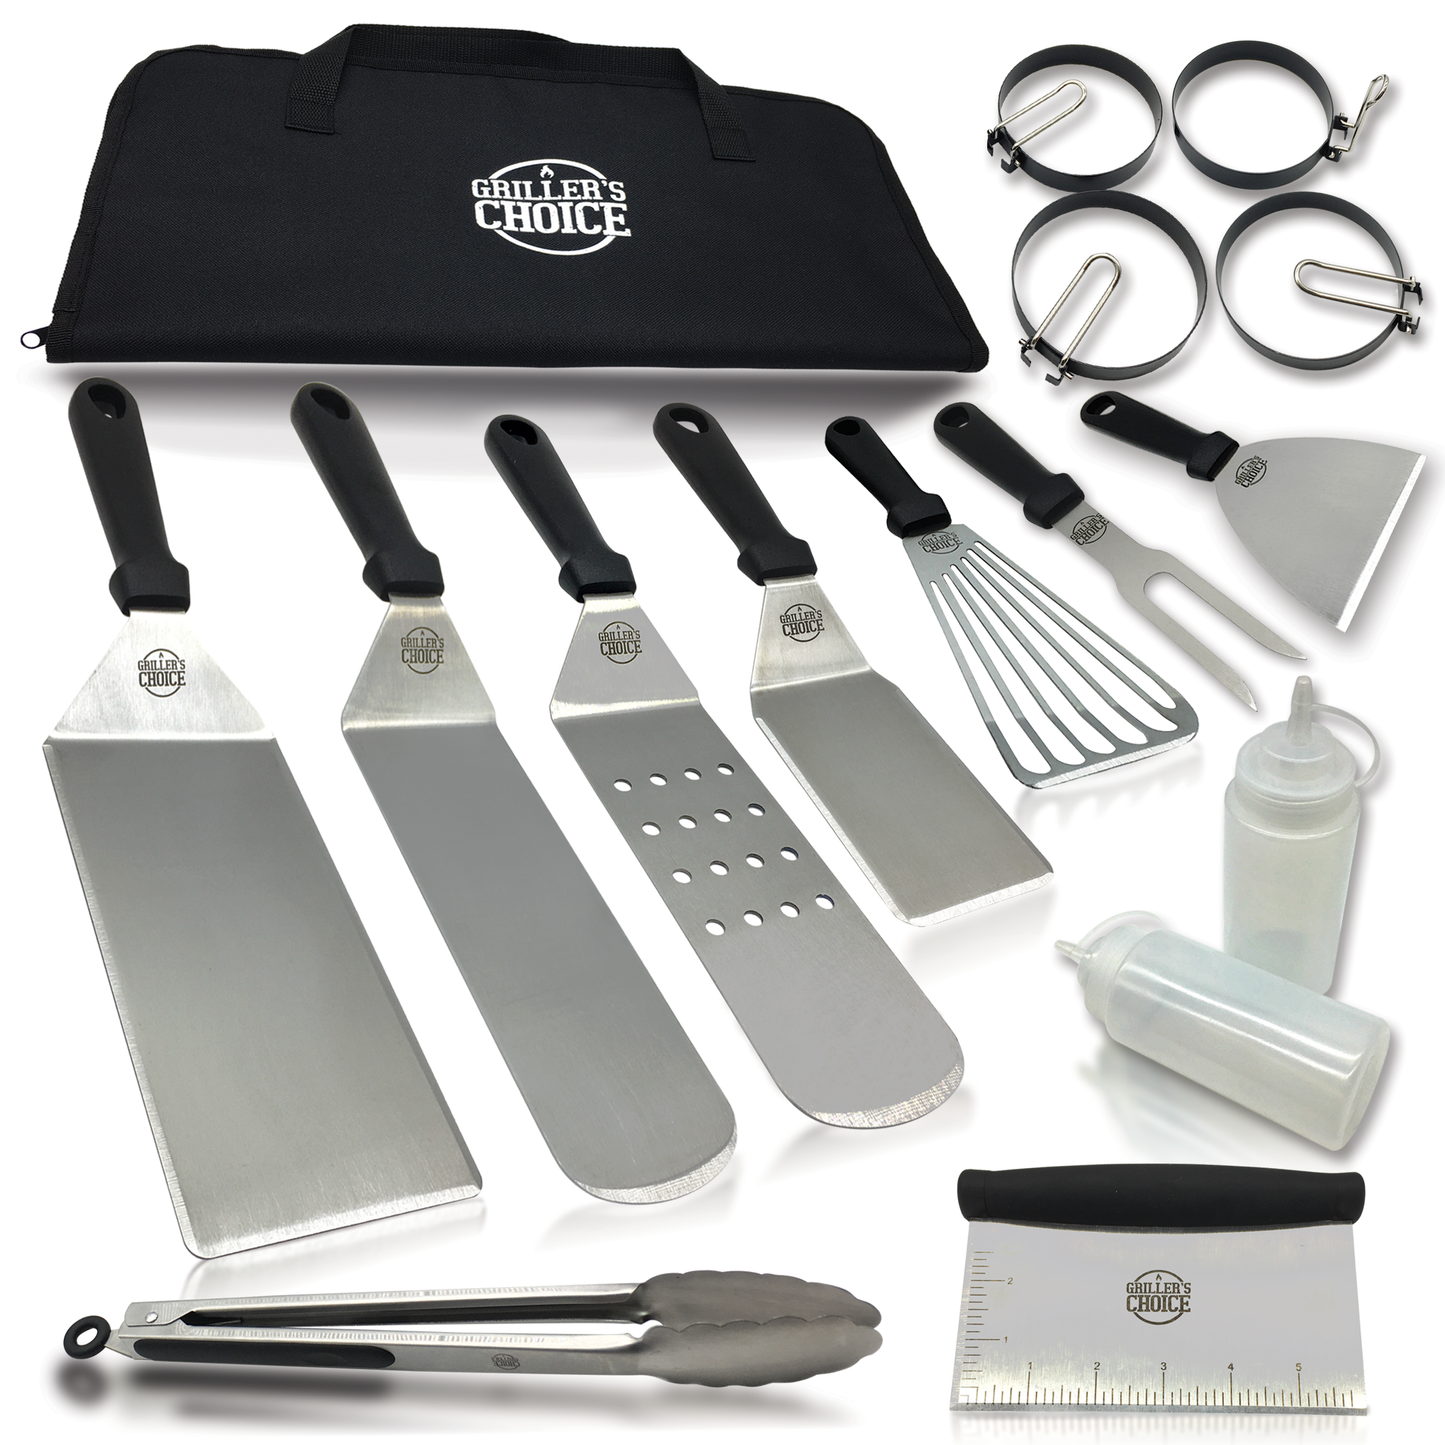 Hhome Griddle Cleaning Kit 16 Piece for Blackstone Flat Top, Grill